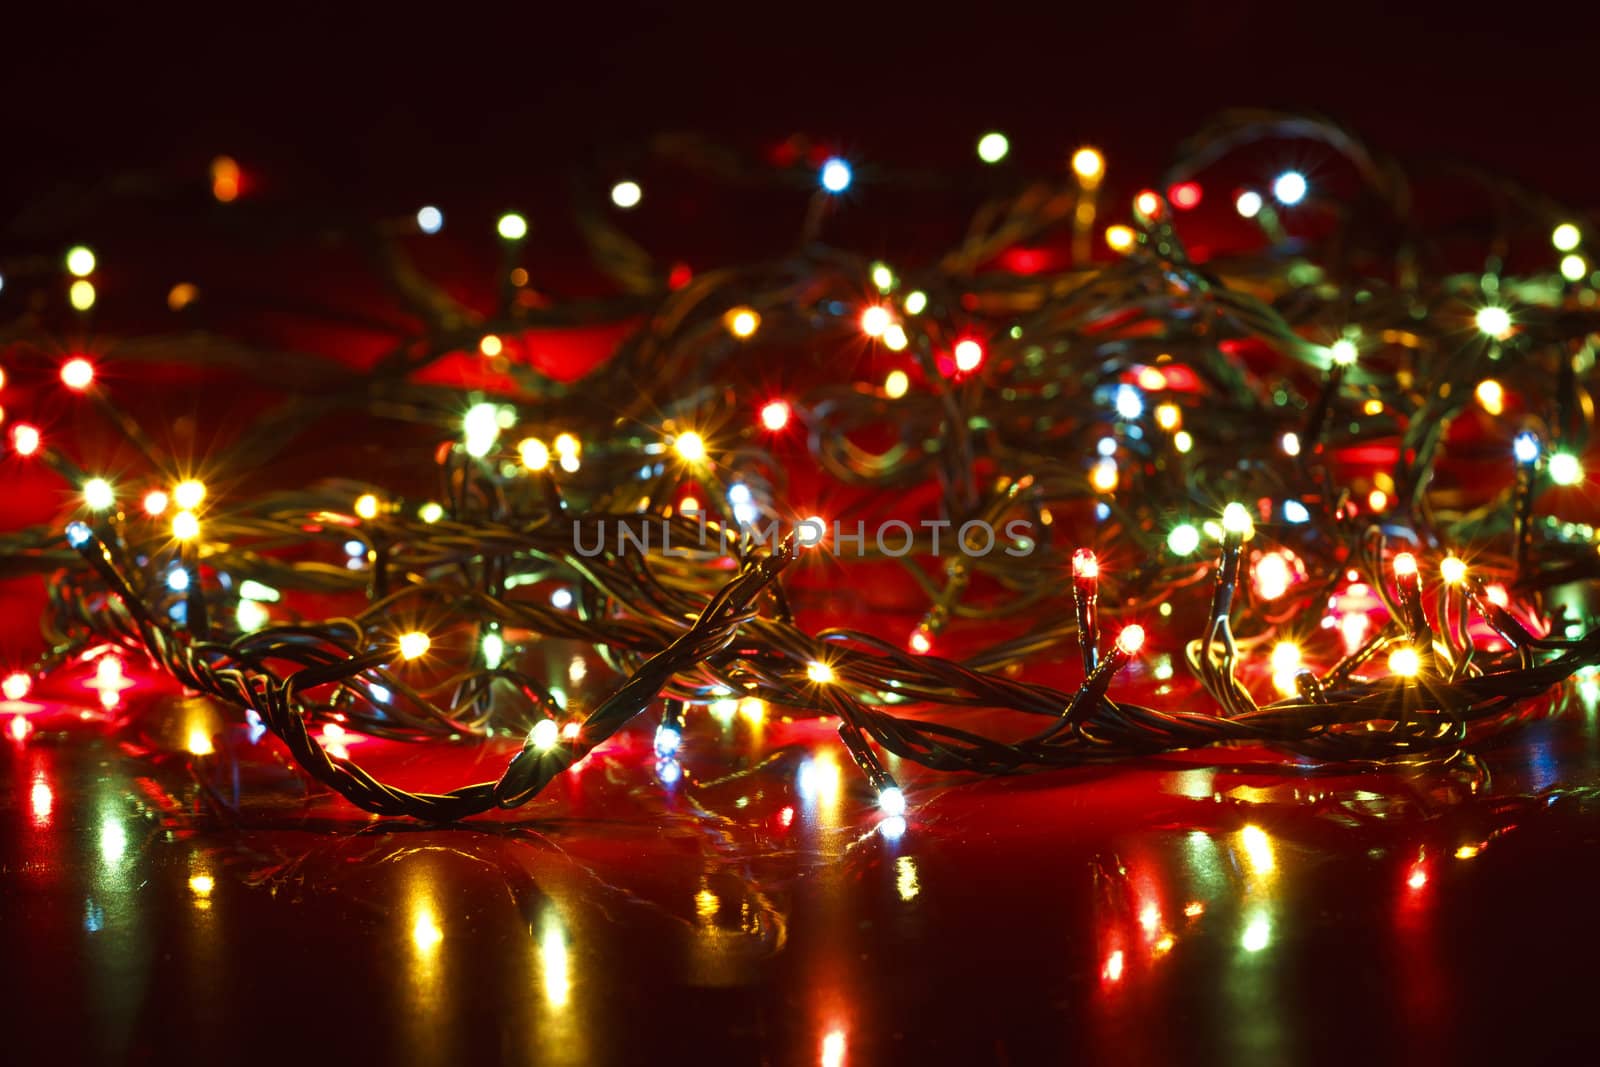 Dimmed Christmas Lights on deep red background